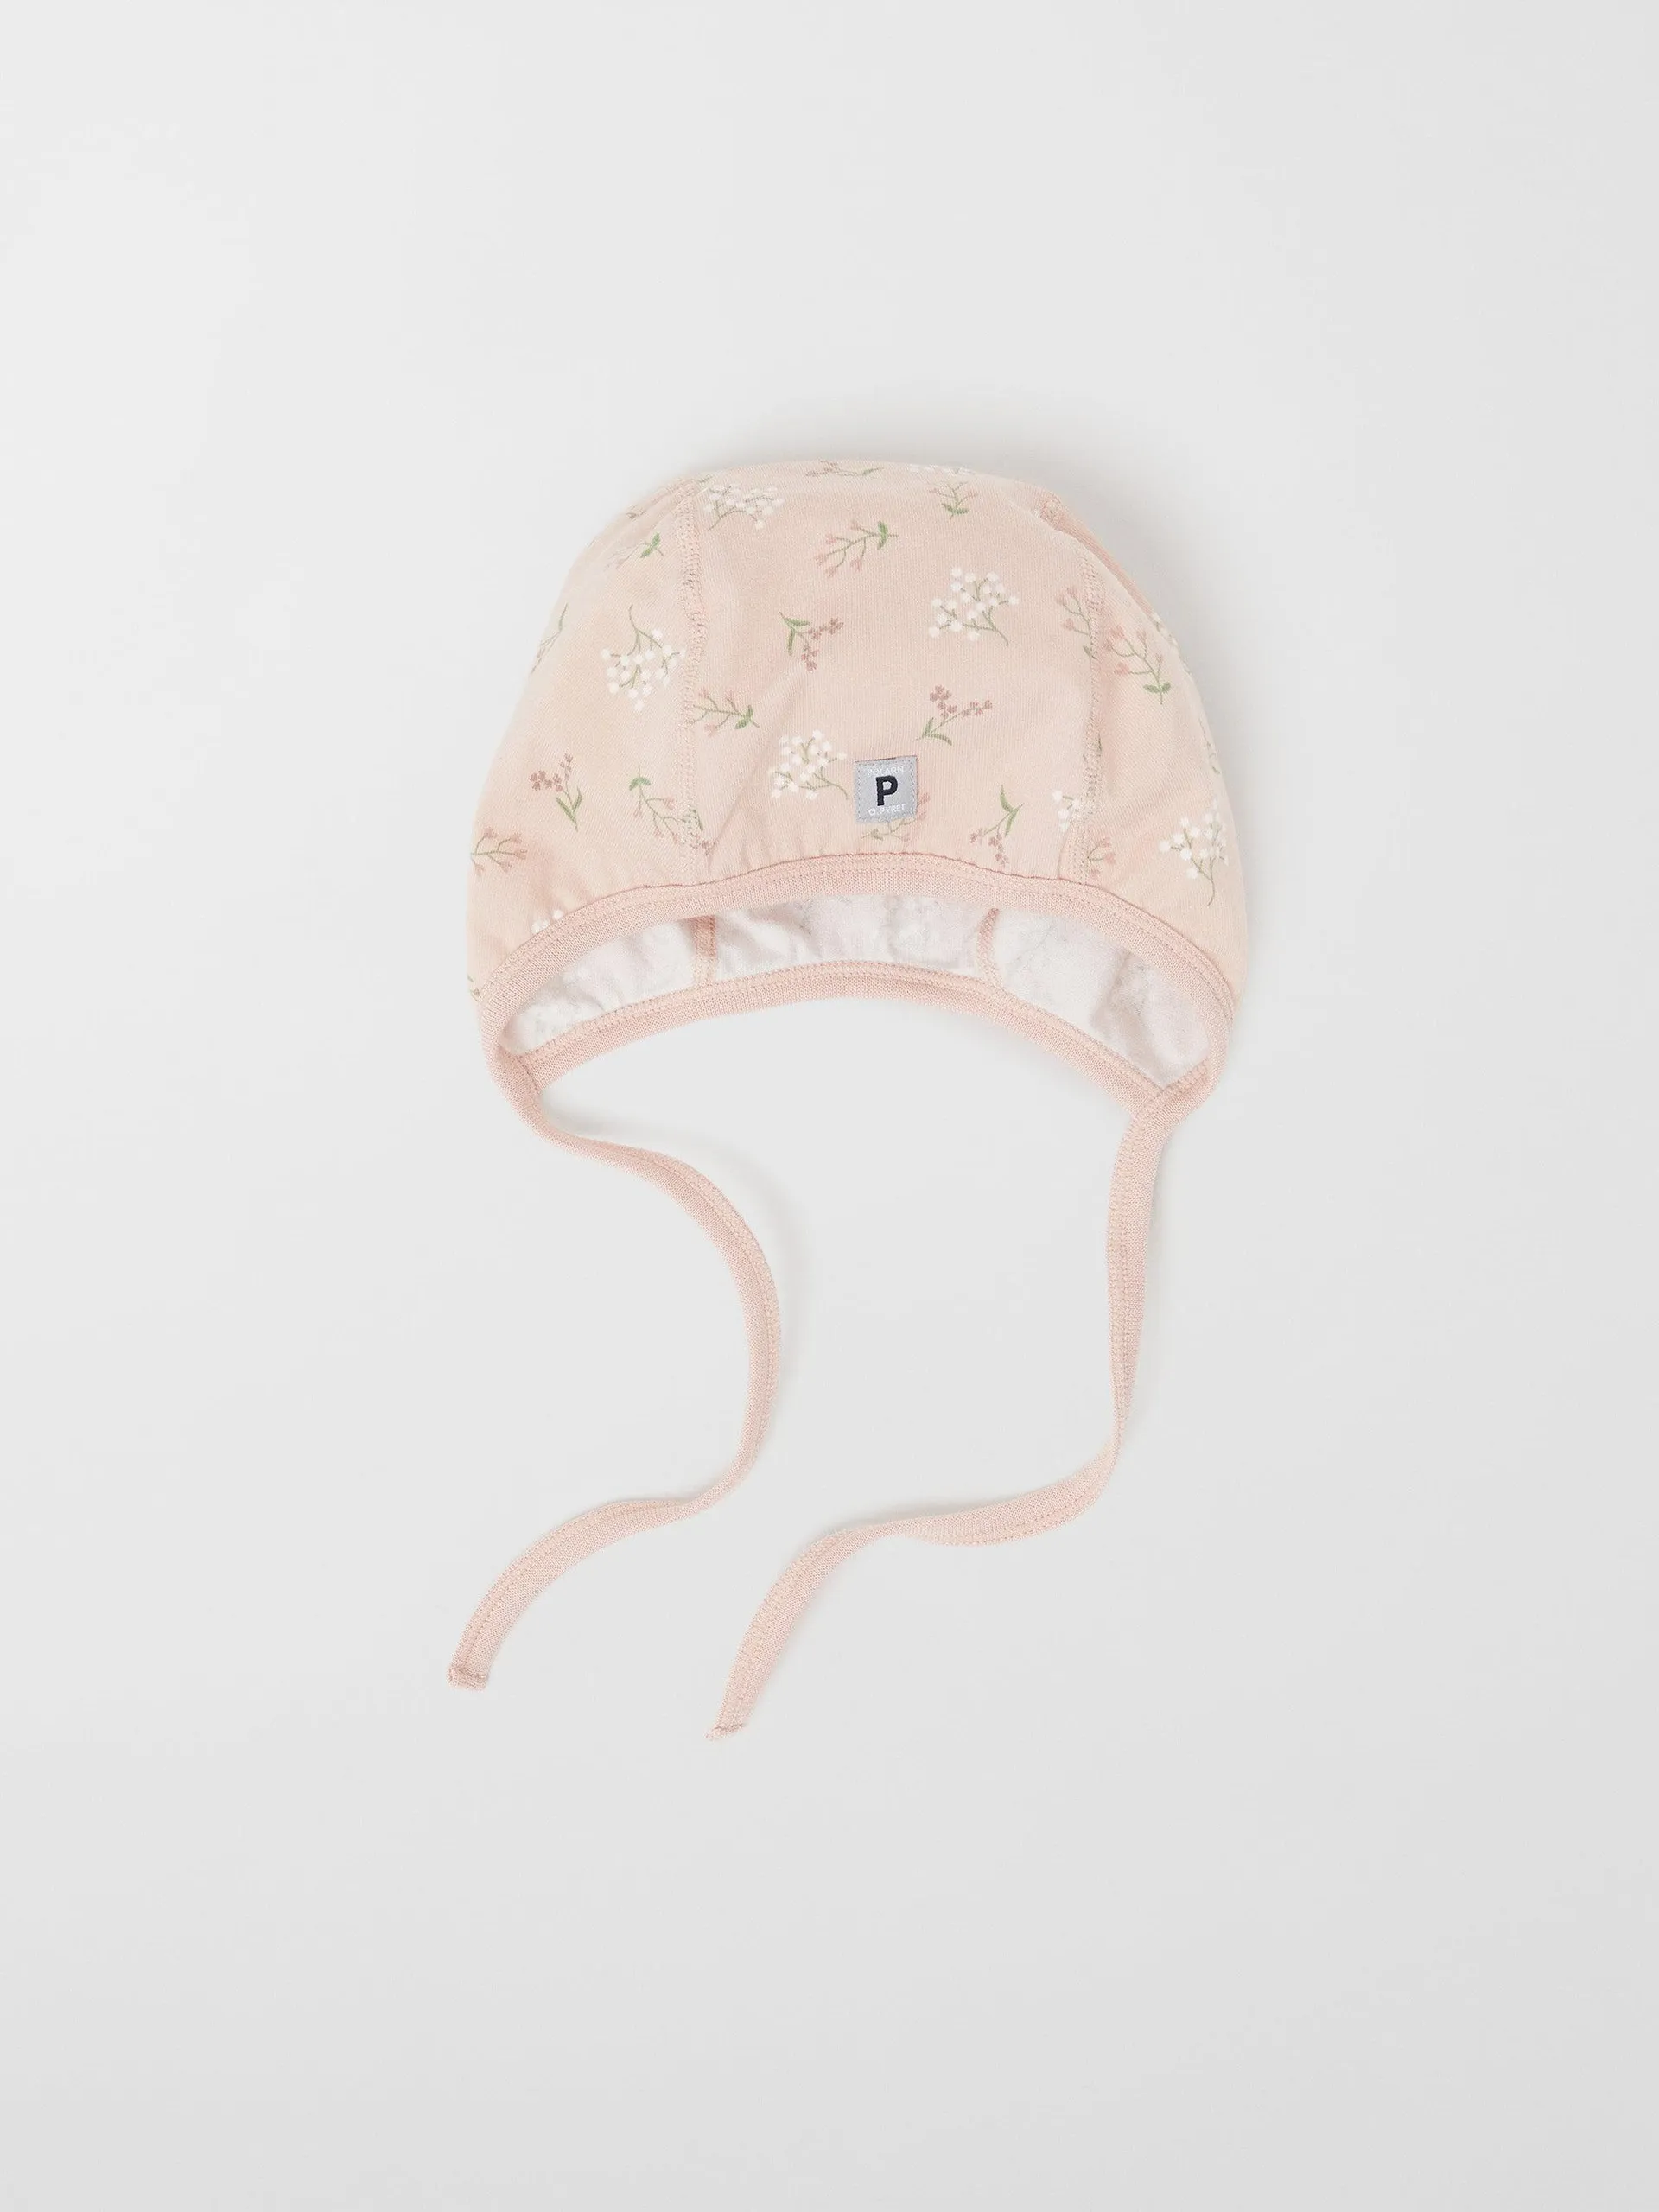 Floral Print Baby Hat